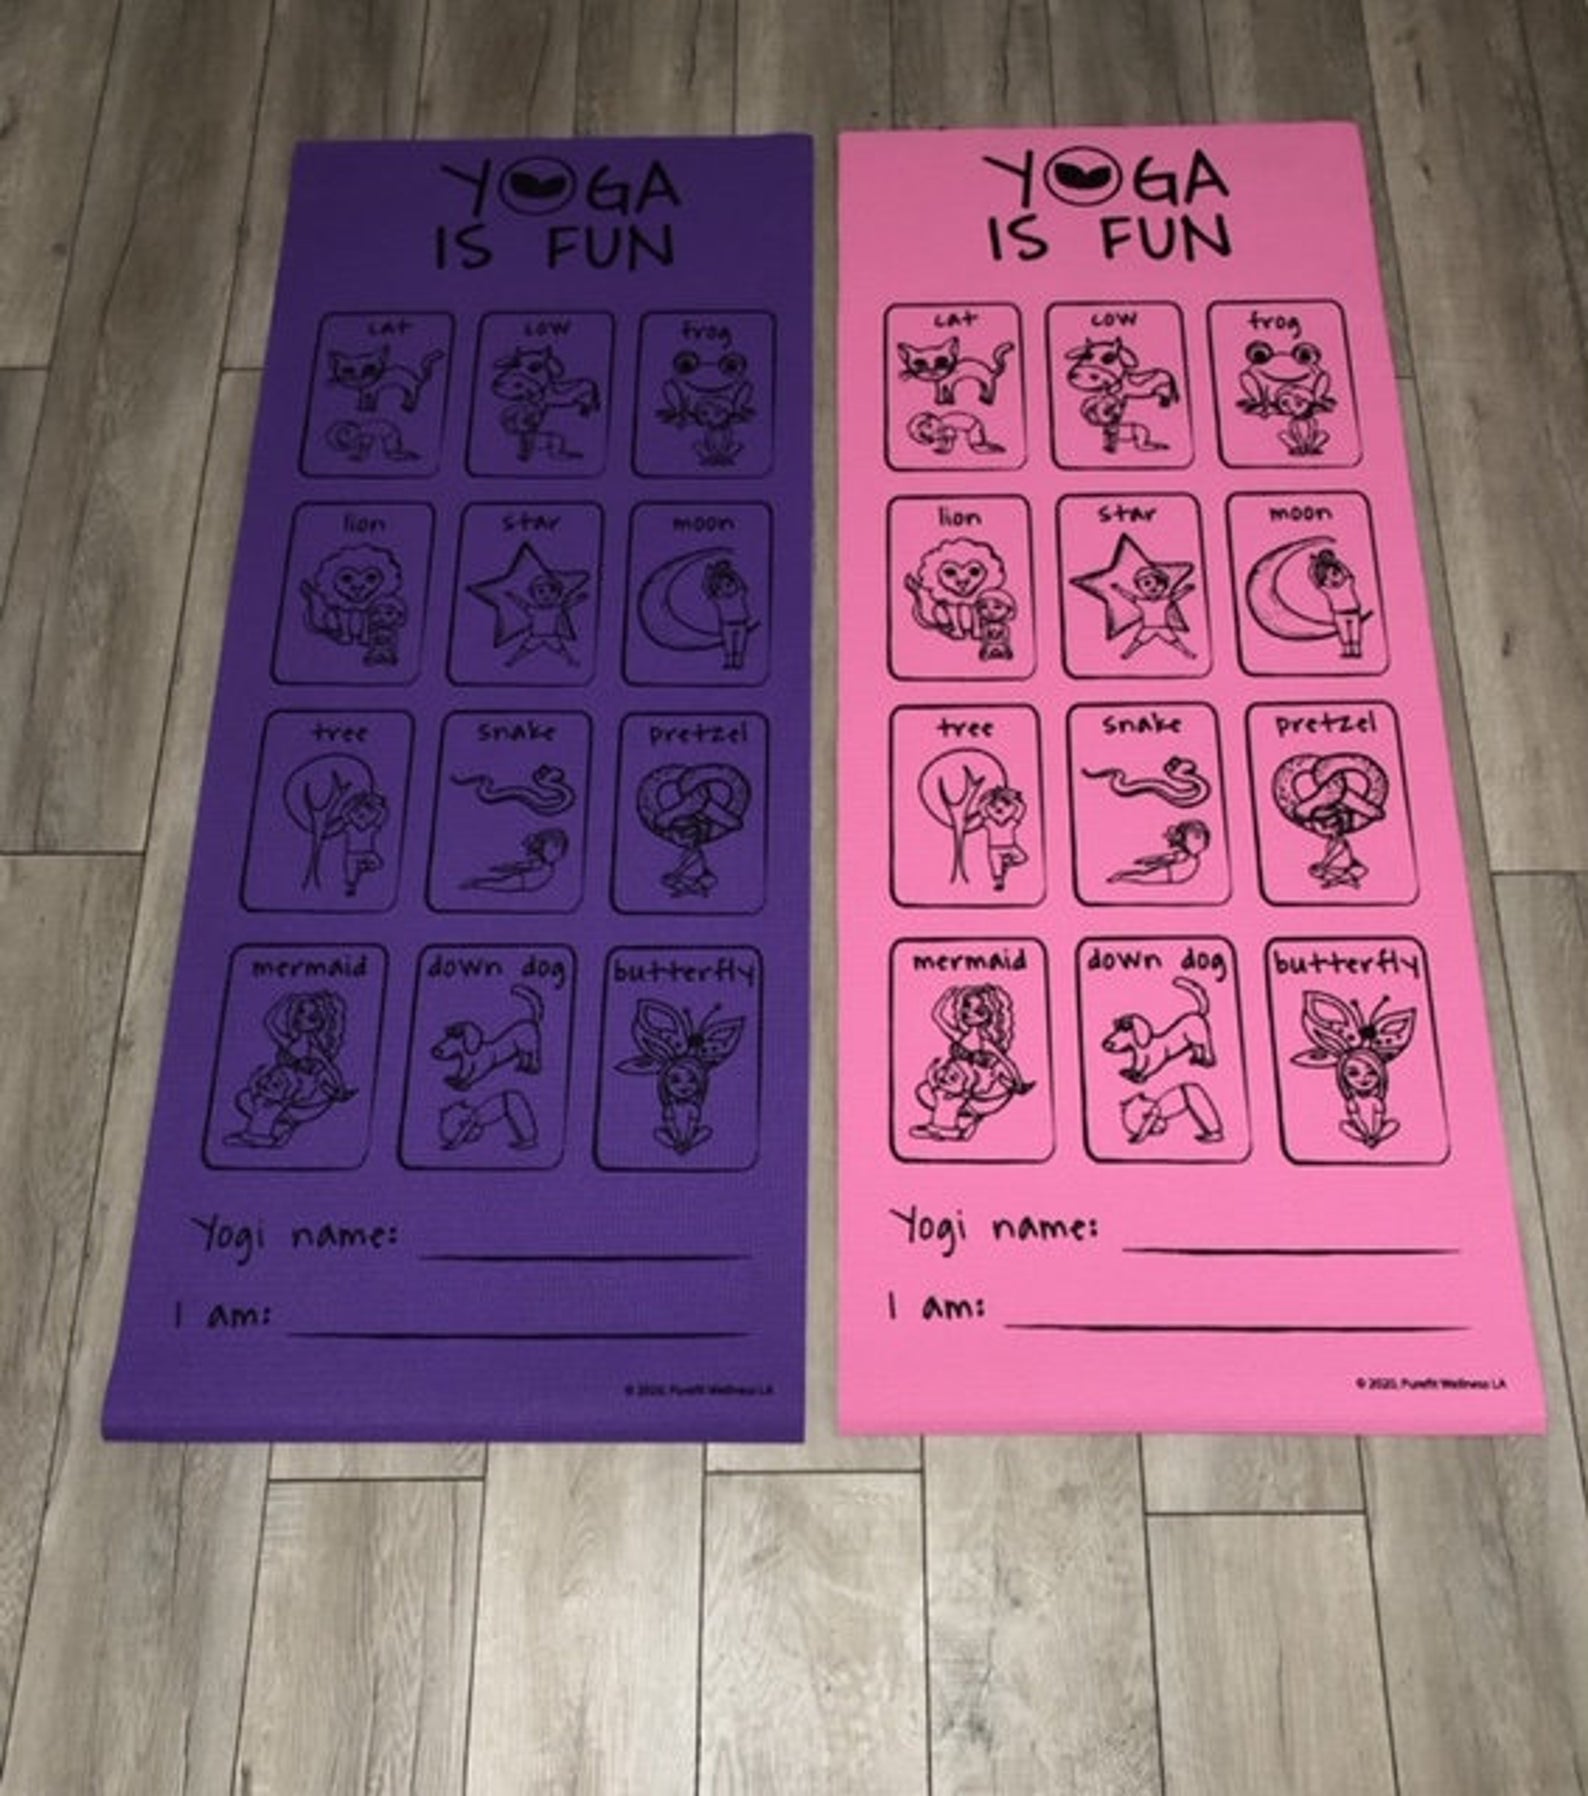 Kids Yoga Mat  These Yoga Mats For Kids Are the Perfect Size For